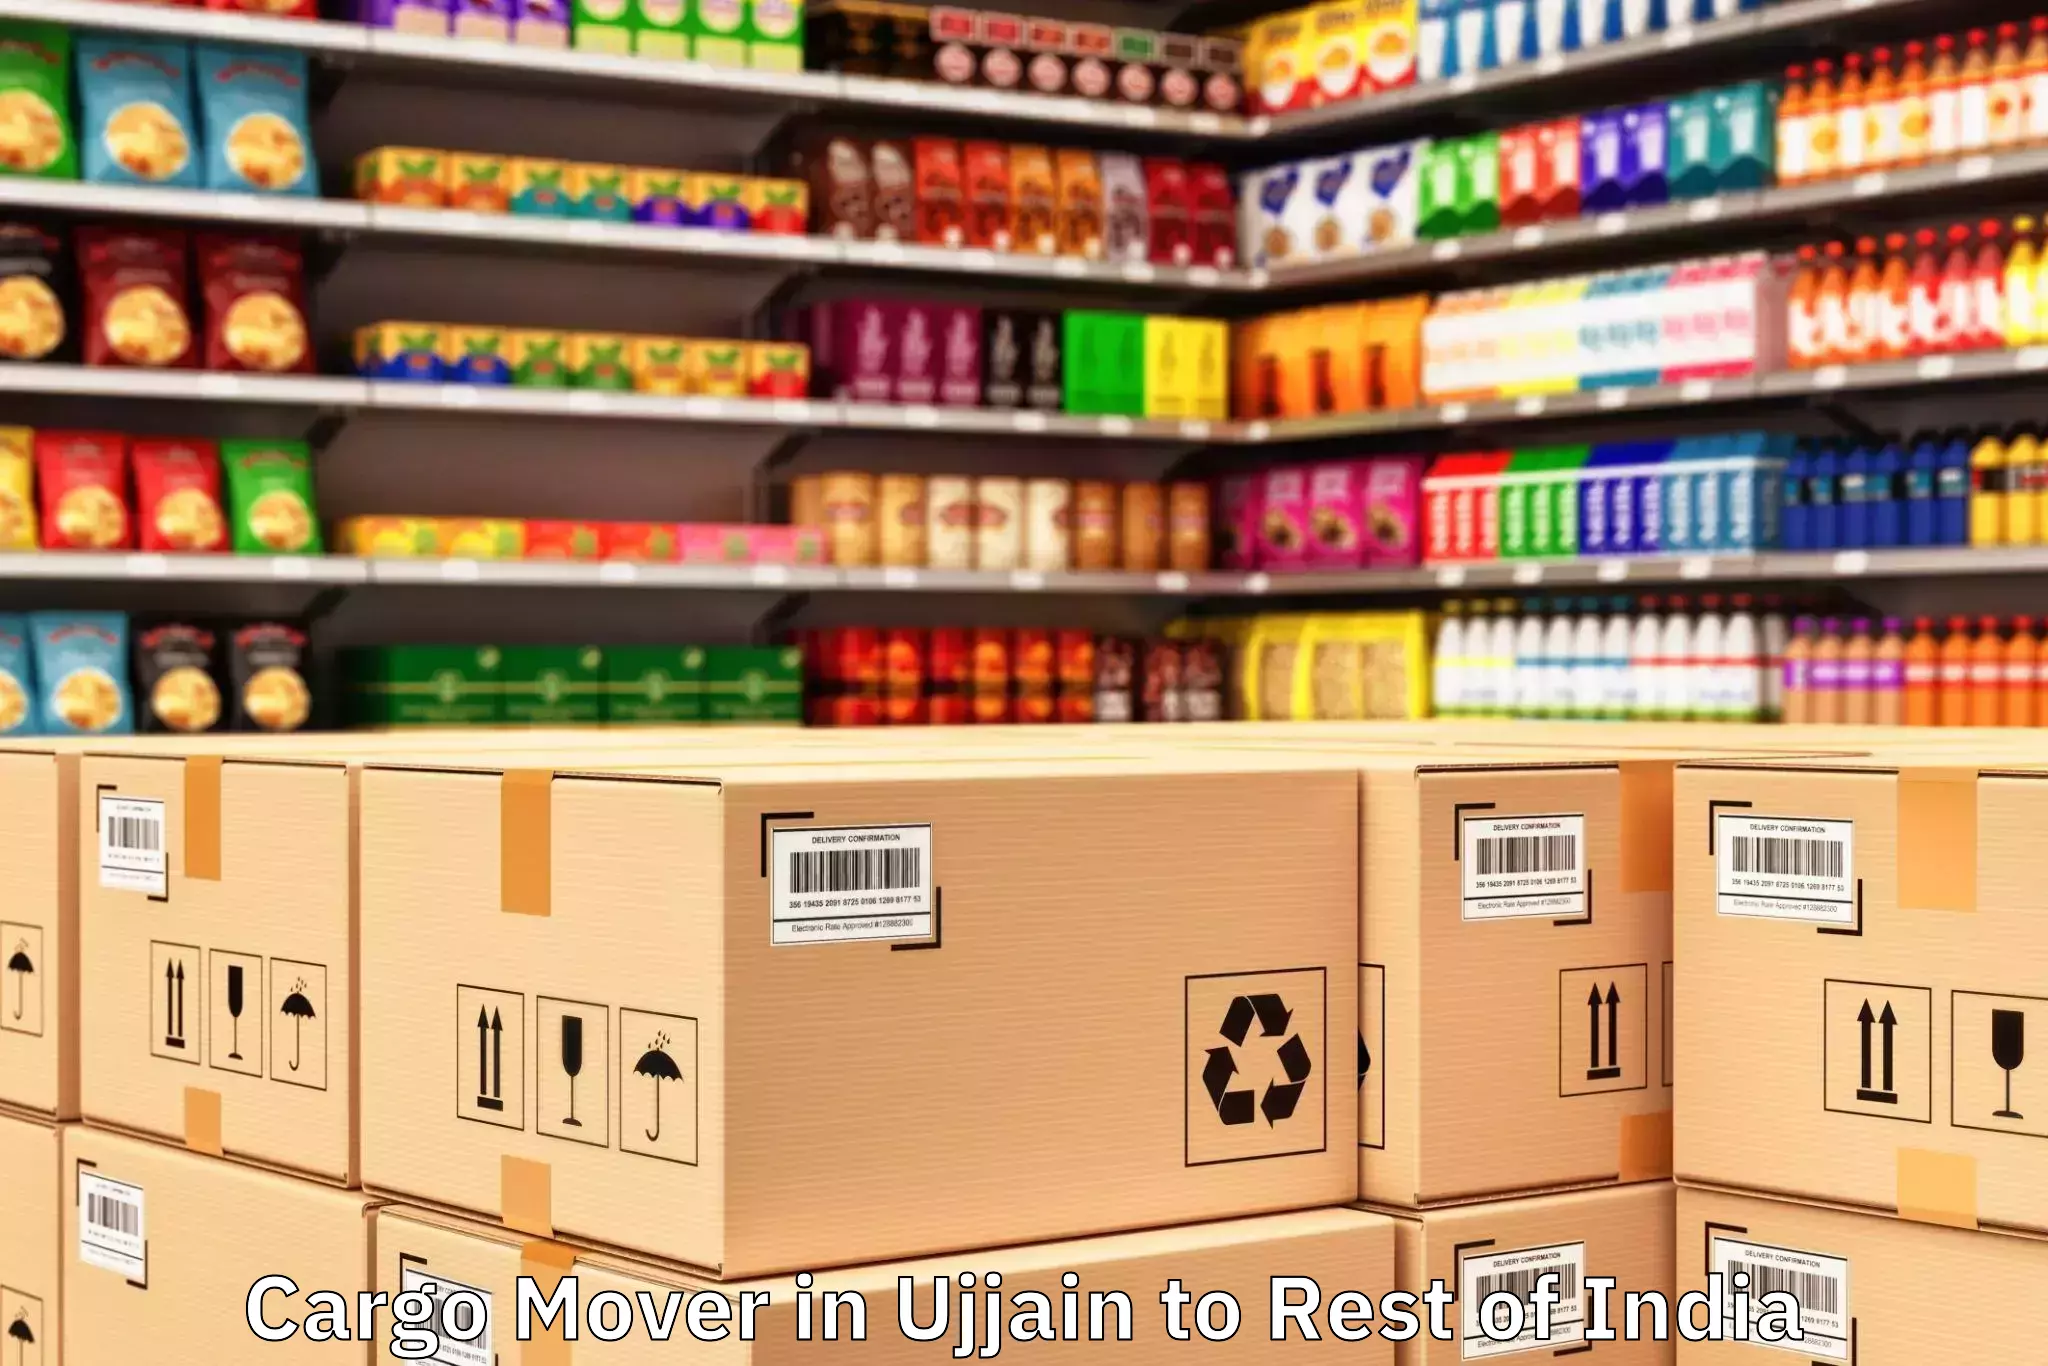 Easy Ujjain to Rest Of India Cargo Mover Booking